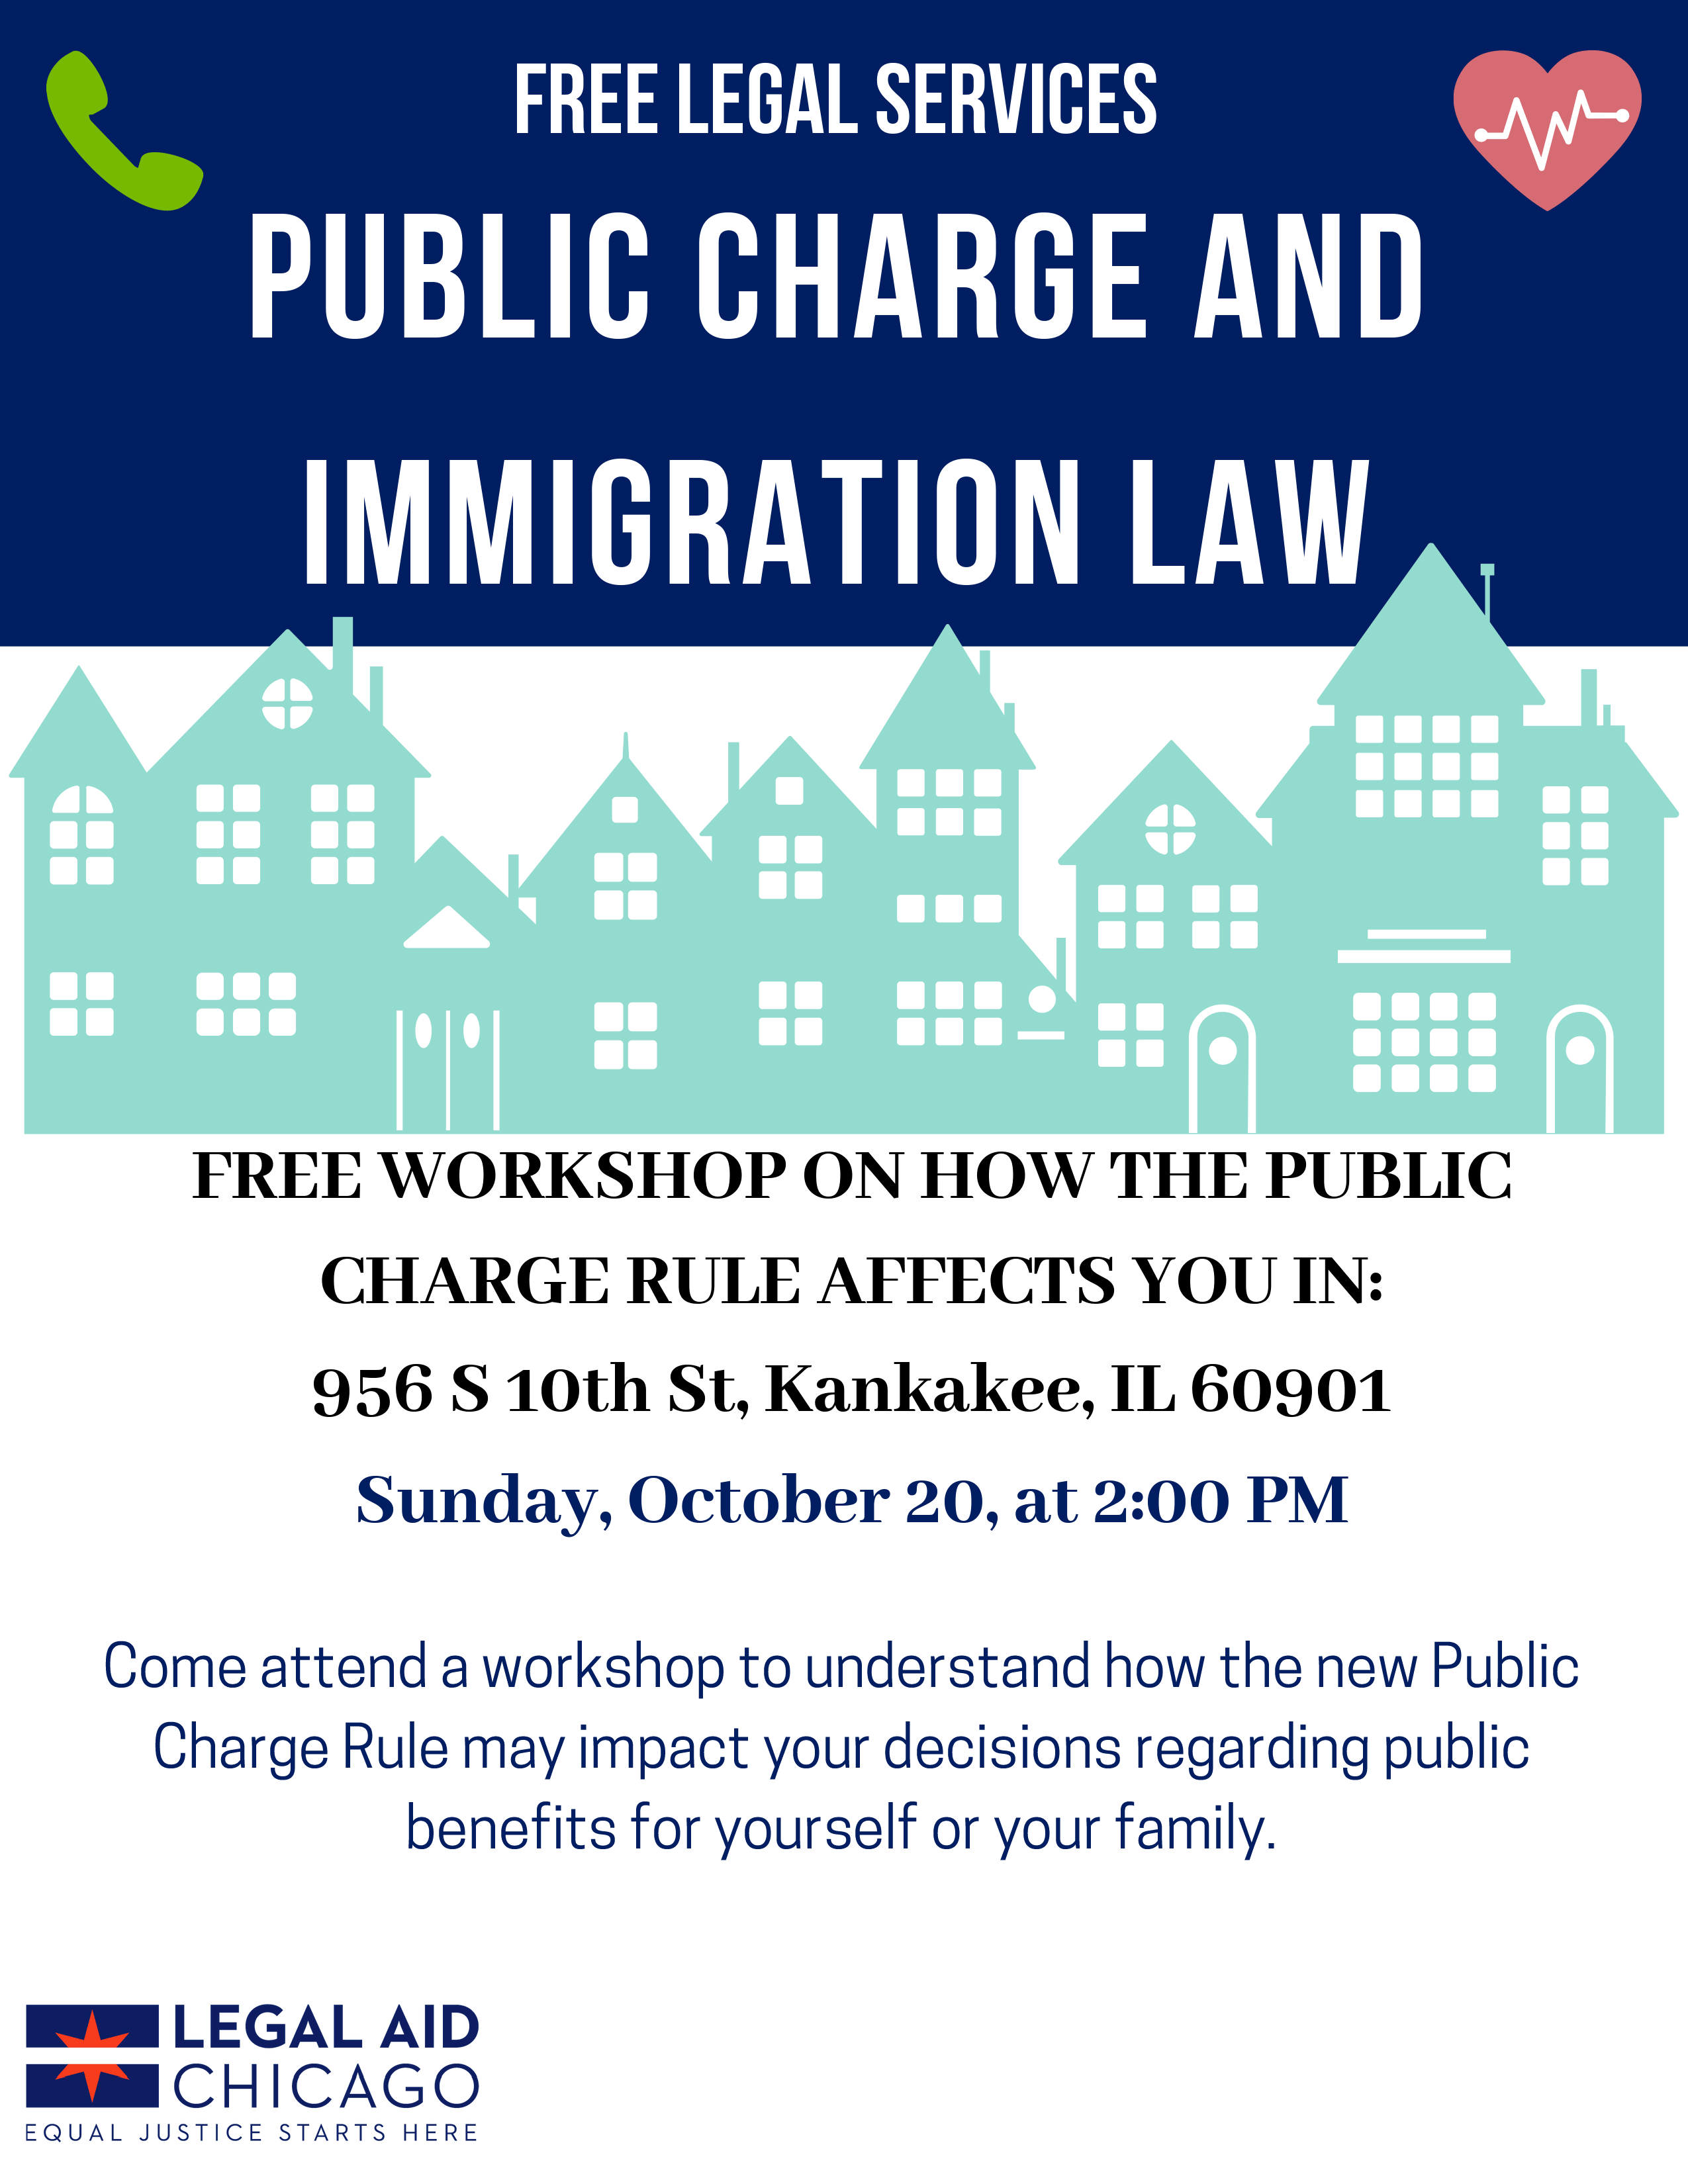 Free Legal Services Public Charge and Immigration Law